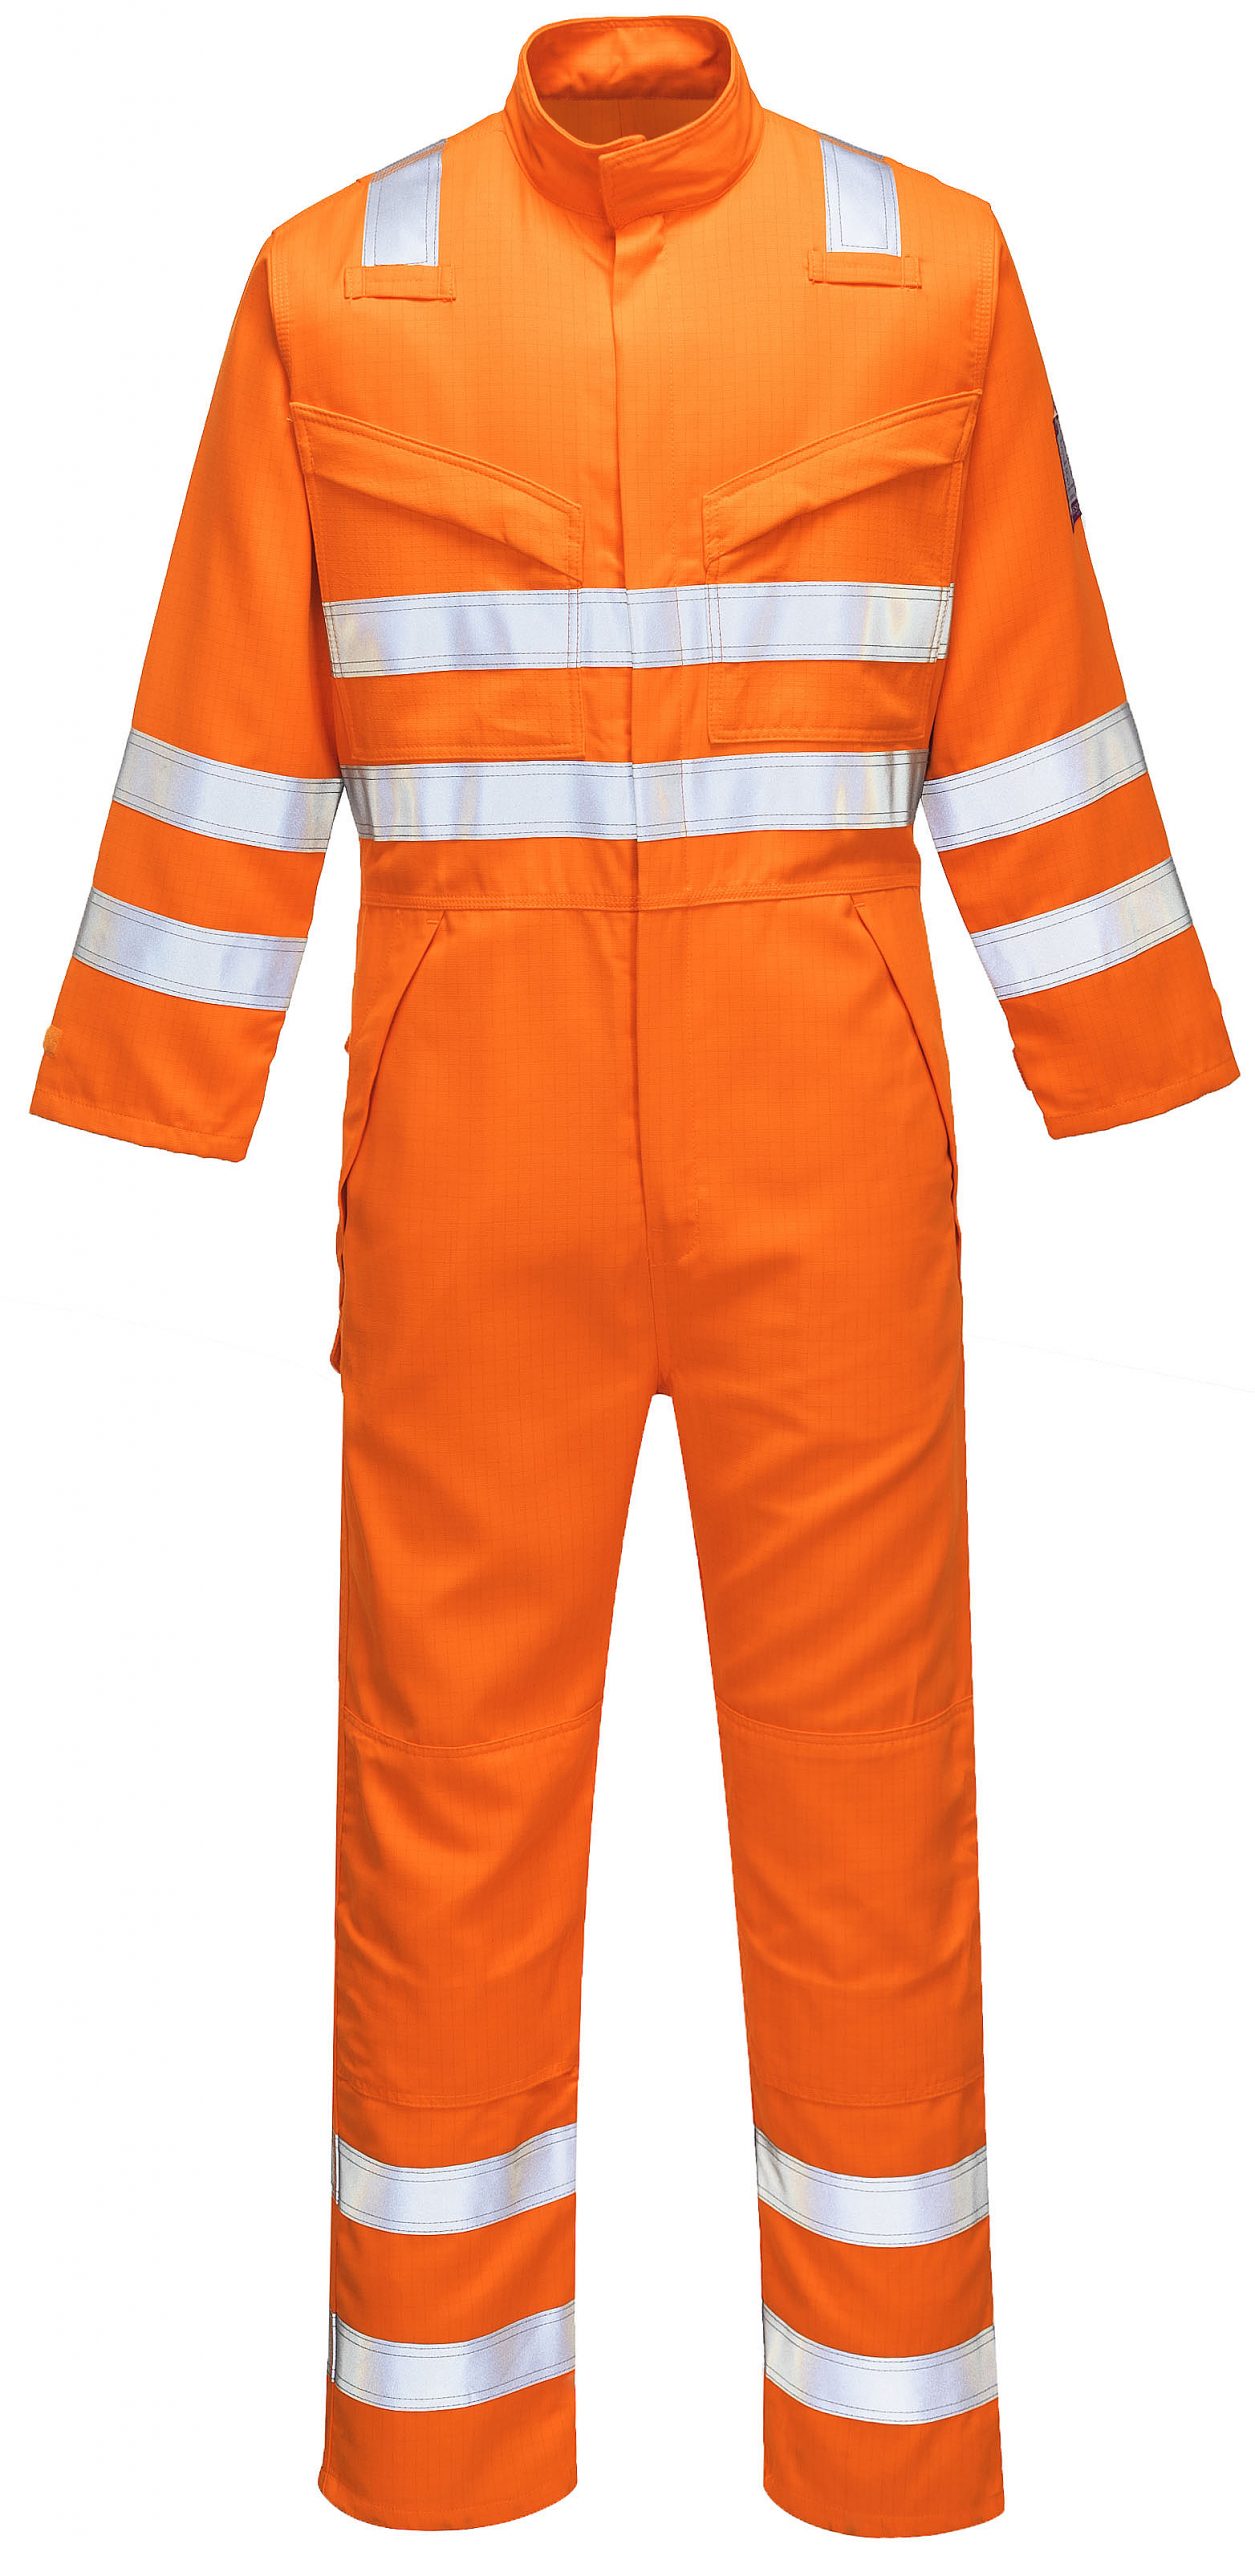 Modaflame RIS Orange Coverall - Aspire Industrial Services